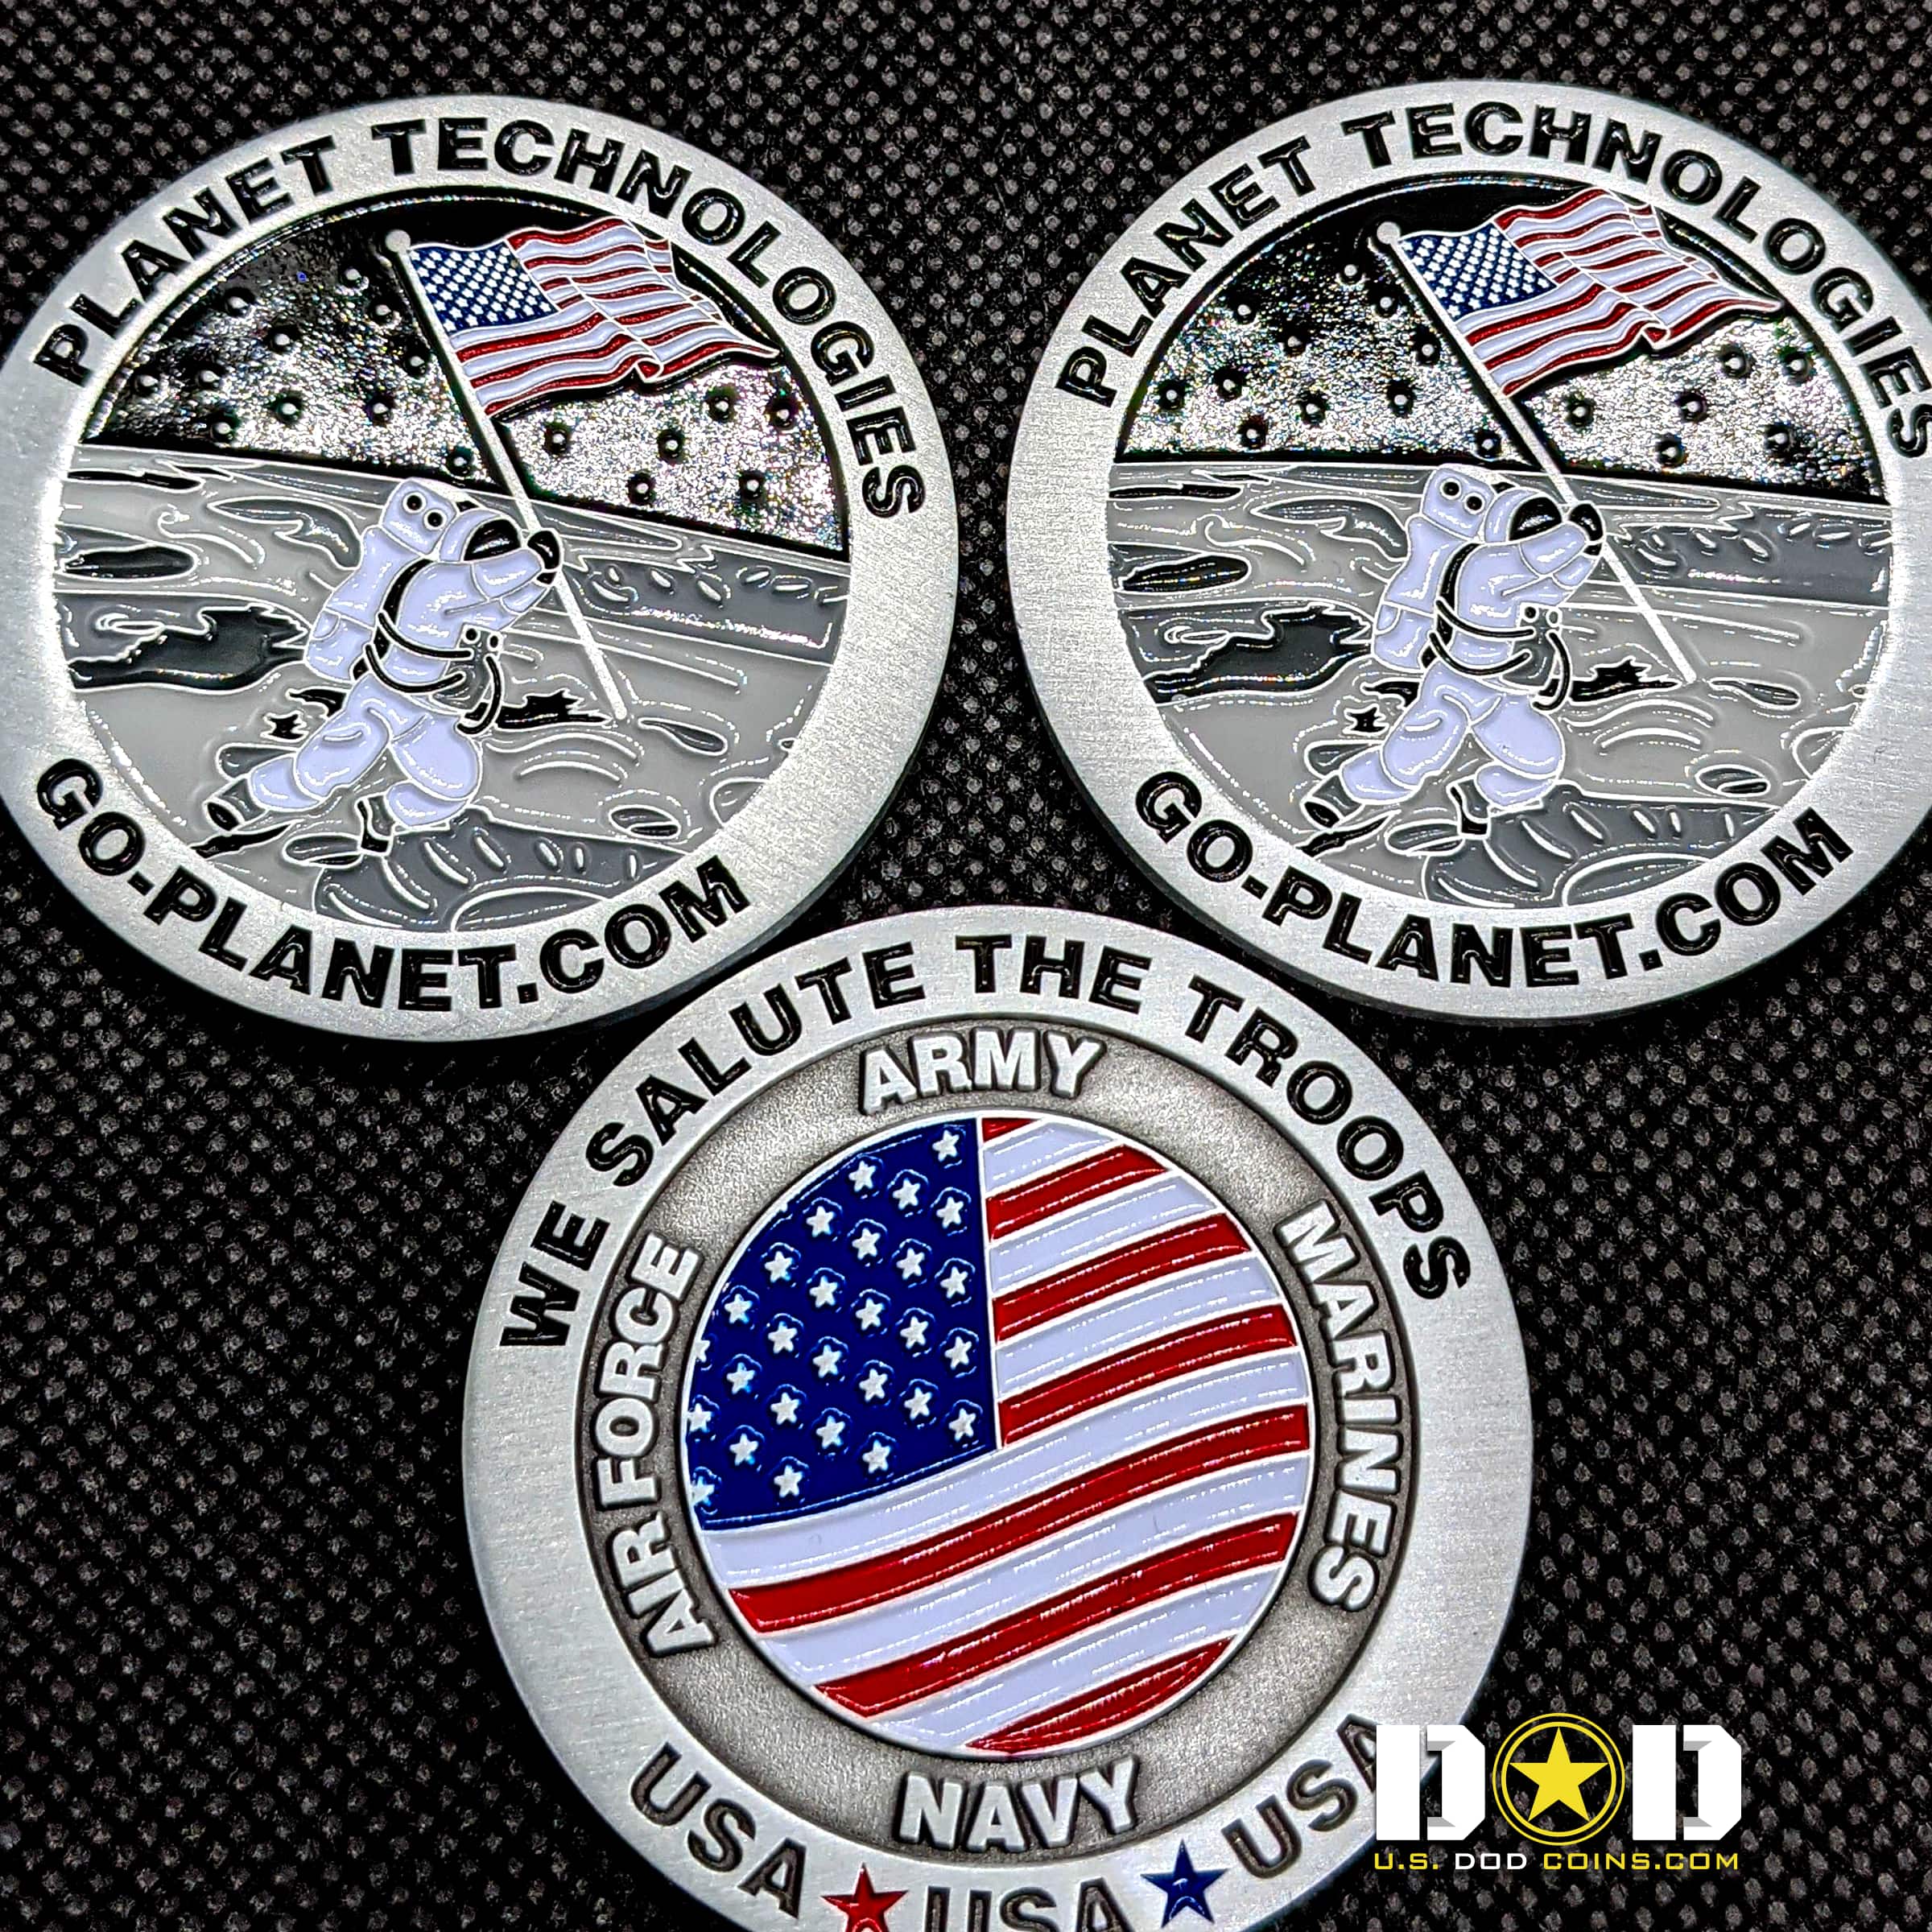 Planet-Technologies-Challenge-Coin_0003_USDODCoins-Challenge-Coins-Examples-62 (1)